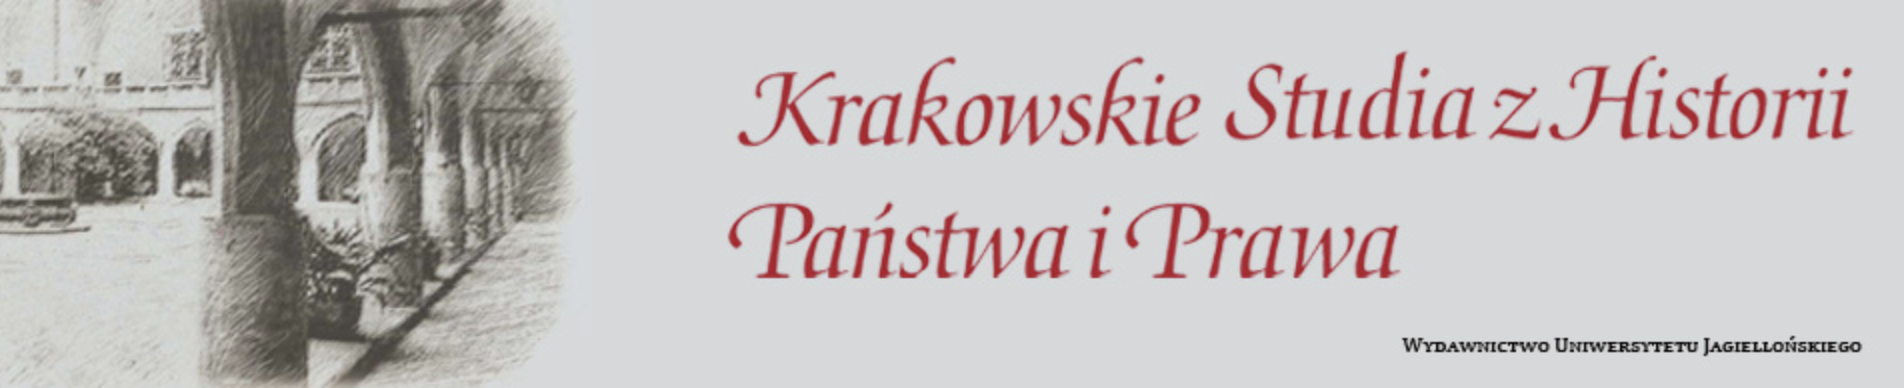 Cracow Studies of Constitutional and Legal History